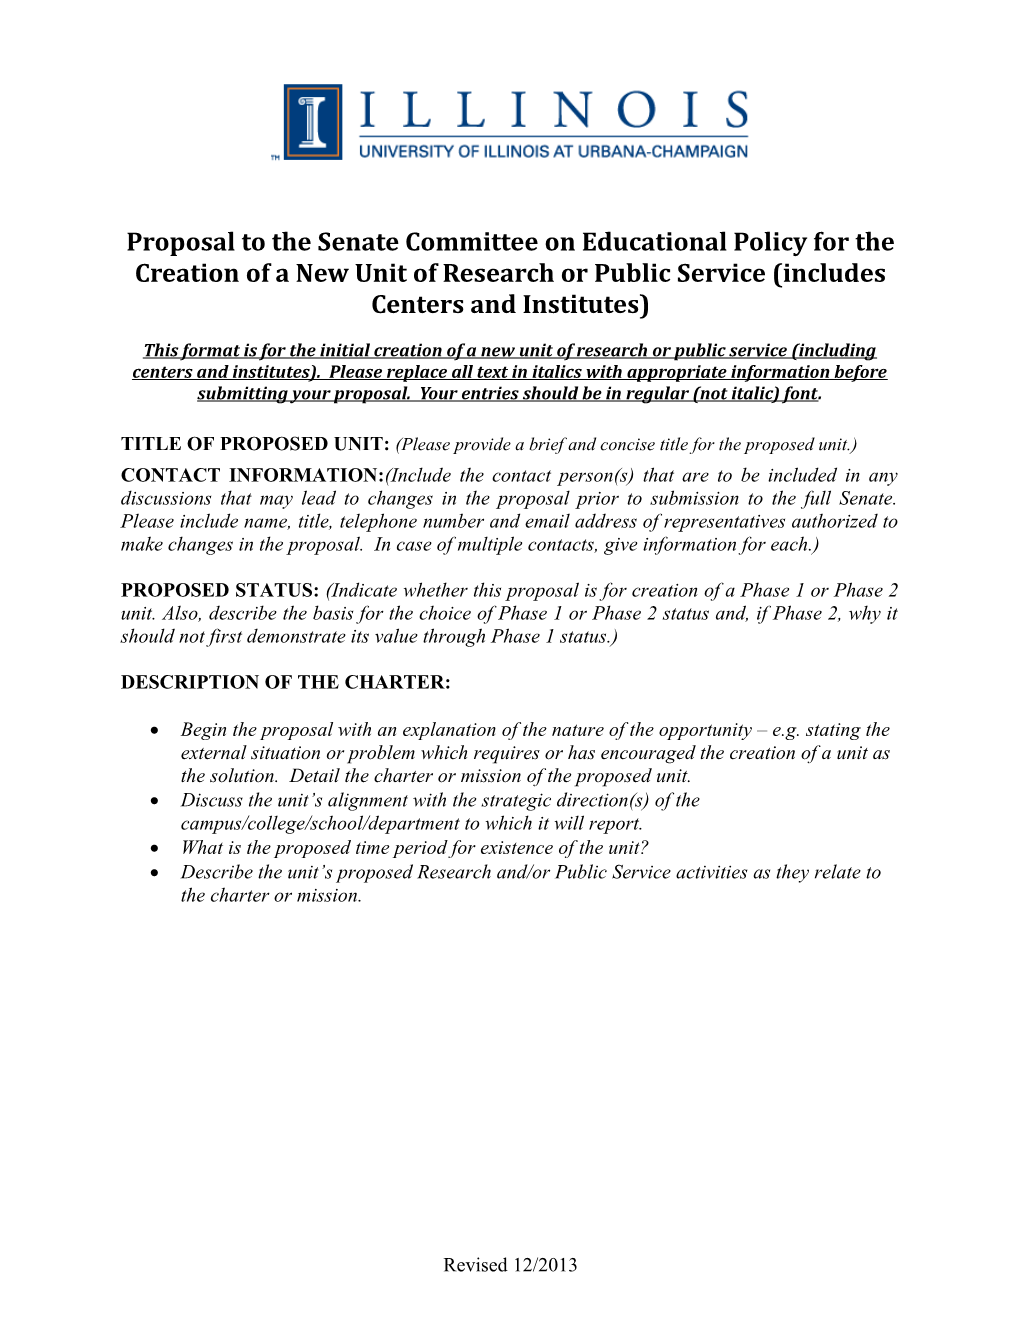 Proposal to the Senate Committee on Educational Policy for the Creation of a New Unit